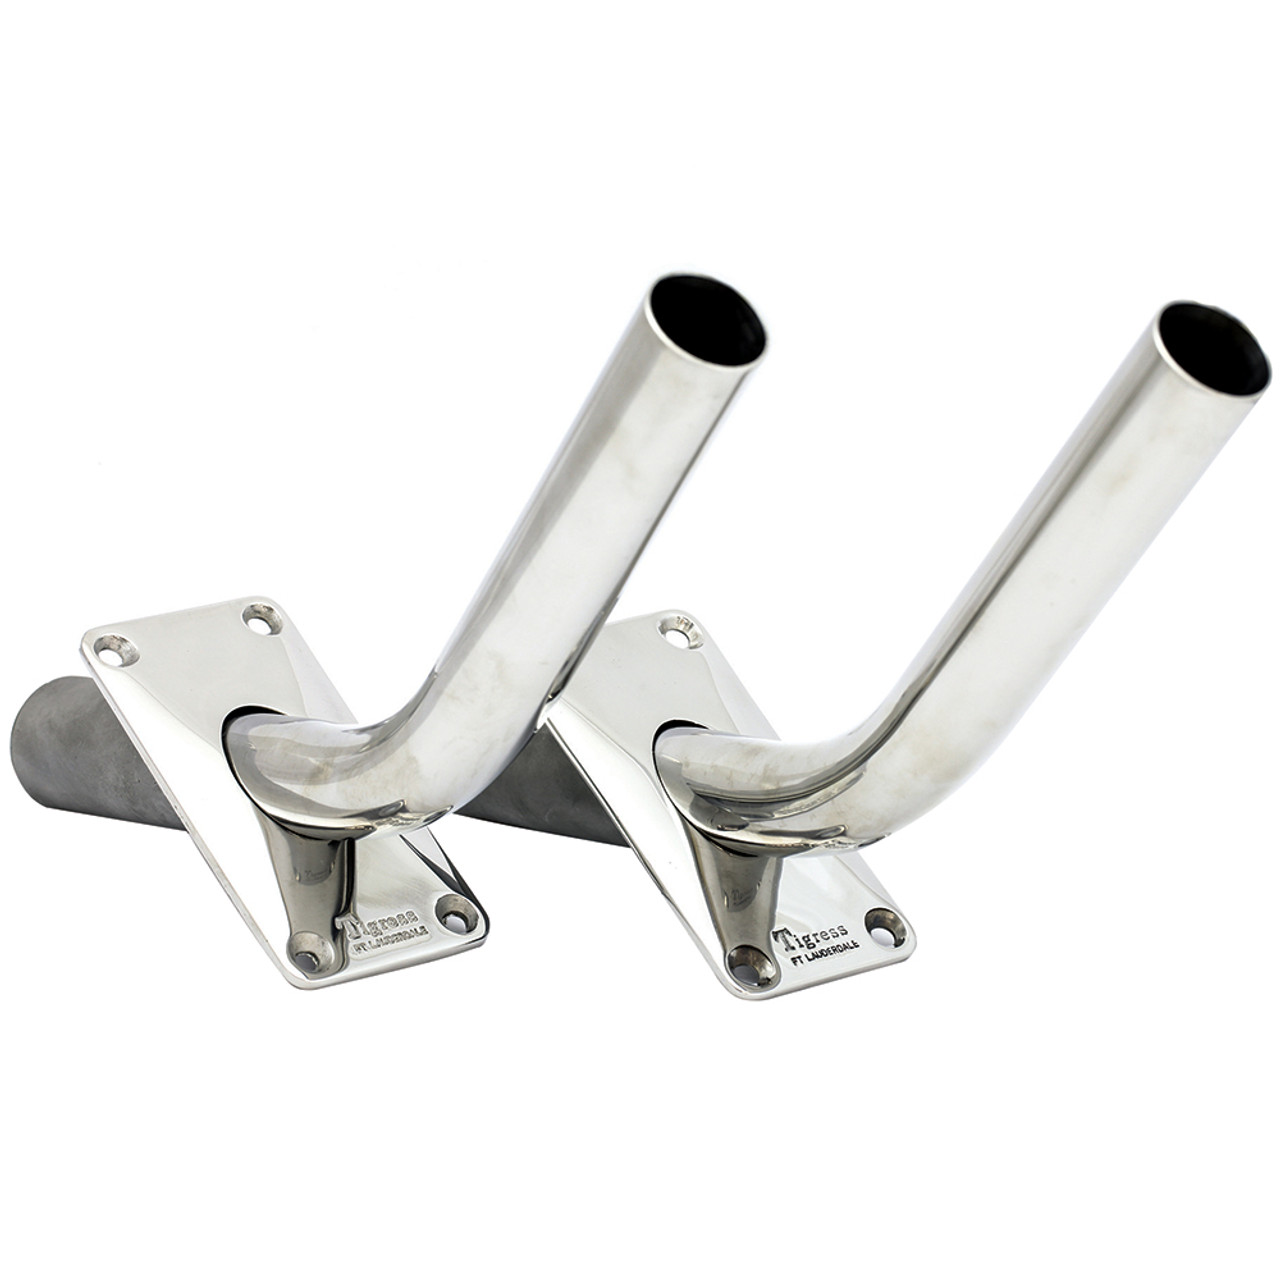 Tigress Gunnel Mount Outrigger Holders - Fabricated 304 S.S. - 1-1/8 I.D.- Pair